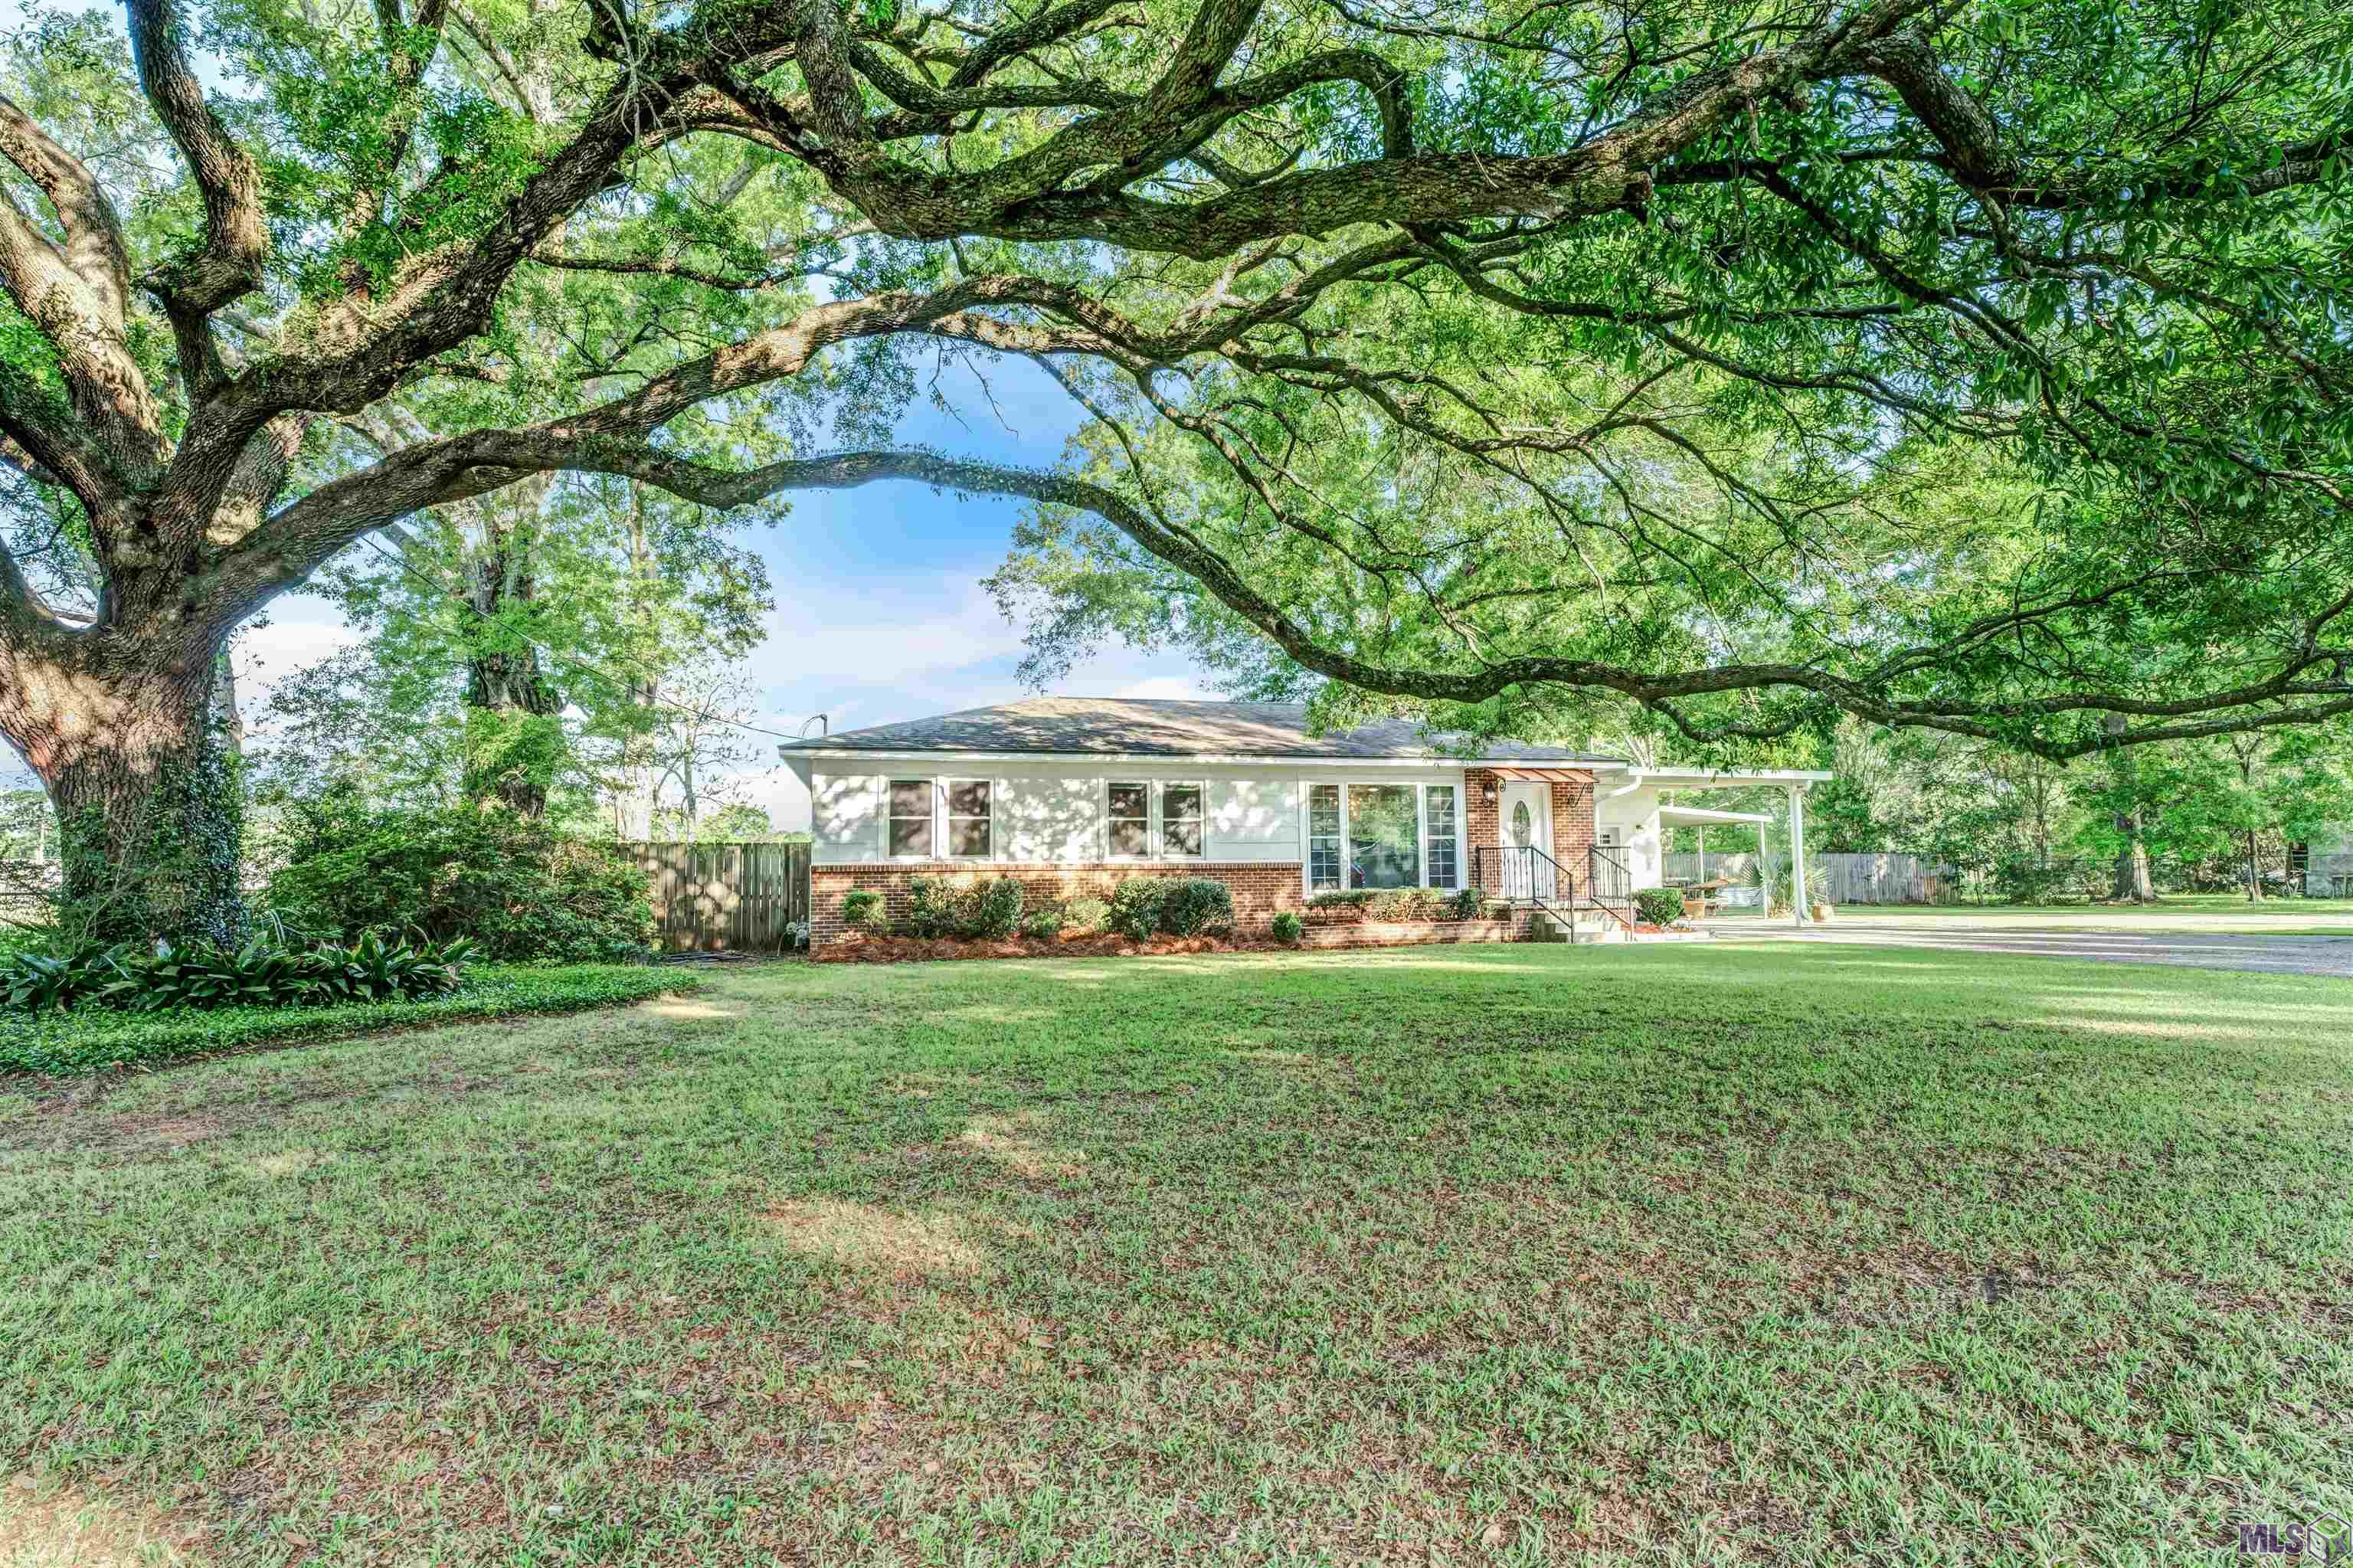 LOOK NO FURTHER! This home was completely renovated in 2017!  Home offers 3 bedrooms, 2 baths and the only thing left to do is move in! Before entering, you will be greeted by the large 1/2 acre lot and a beautiful live oak tree in the front yard.  A few highlights include wood look tile floors throughout, custom cabinets, trendy light fixtures, and energy efficient windows.  The kitchen is an entertainer's dream with tons of counter space, 3 cm slab granite, a farmers sink, stainless steel appliances, and soft close drawers. You'll love winding down in the large master suite which offers a large freestanding soaking tub and a separate job built shower with multi body sprayers.  The large backyard is also a treat consisting of a large rear porch and a separate gazebo. Other features include a tankless water heater, newer electrical wiring, and the roof is approximately 6 years old, This is truly a must see!